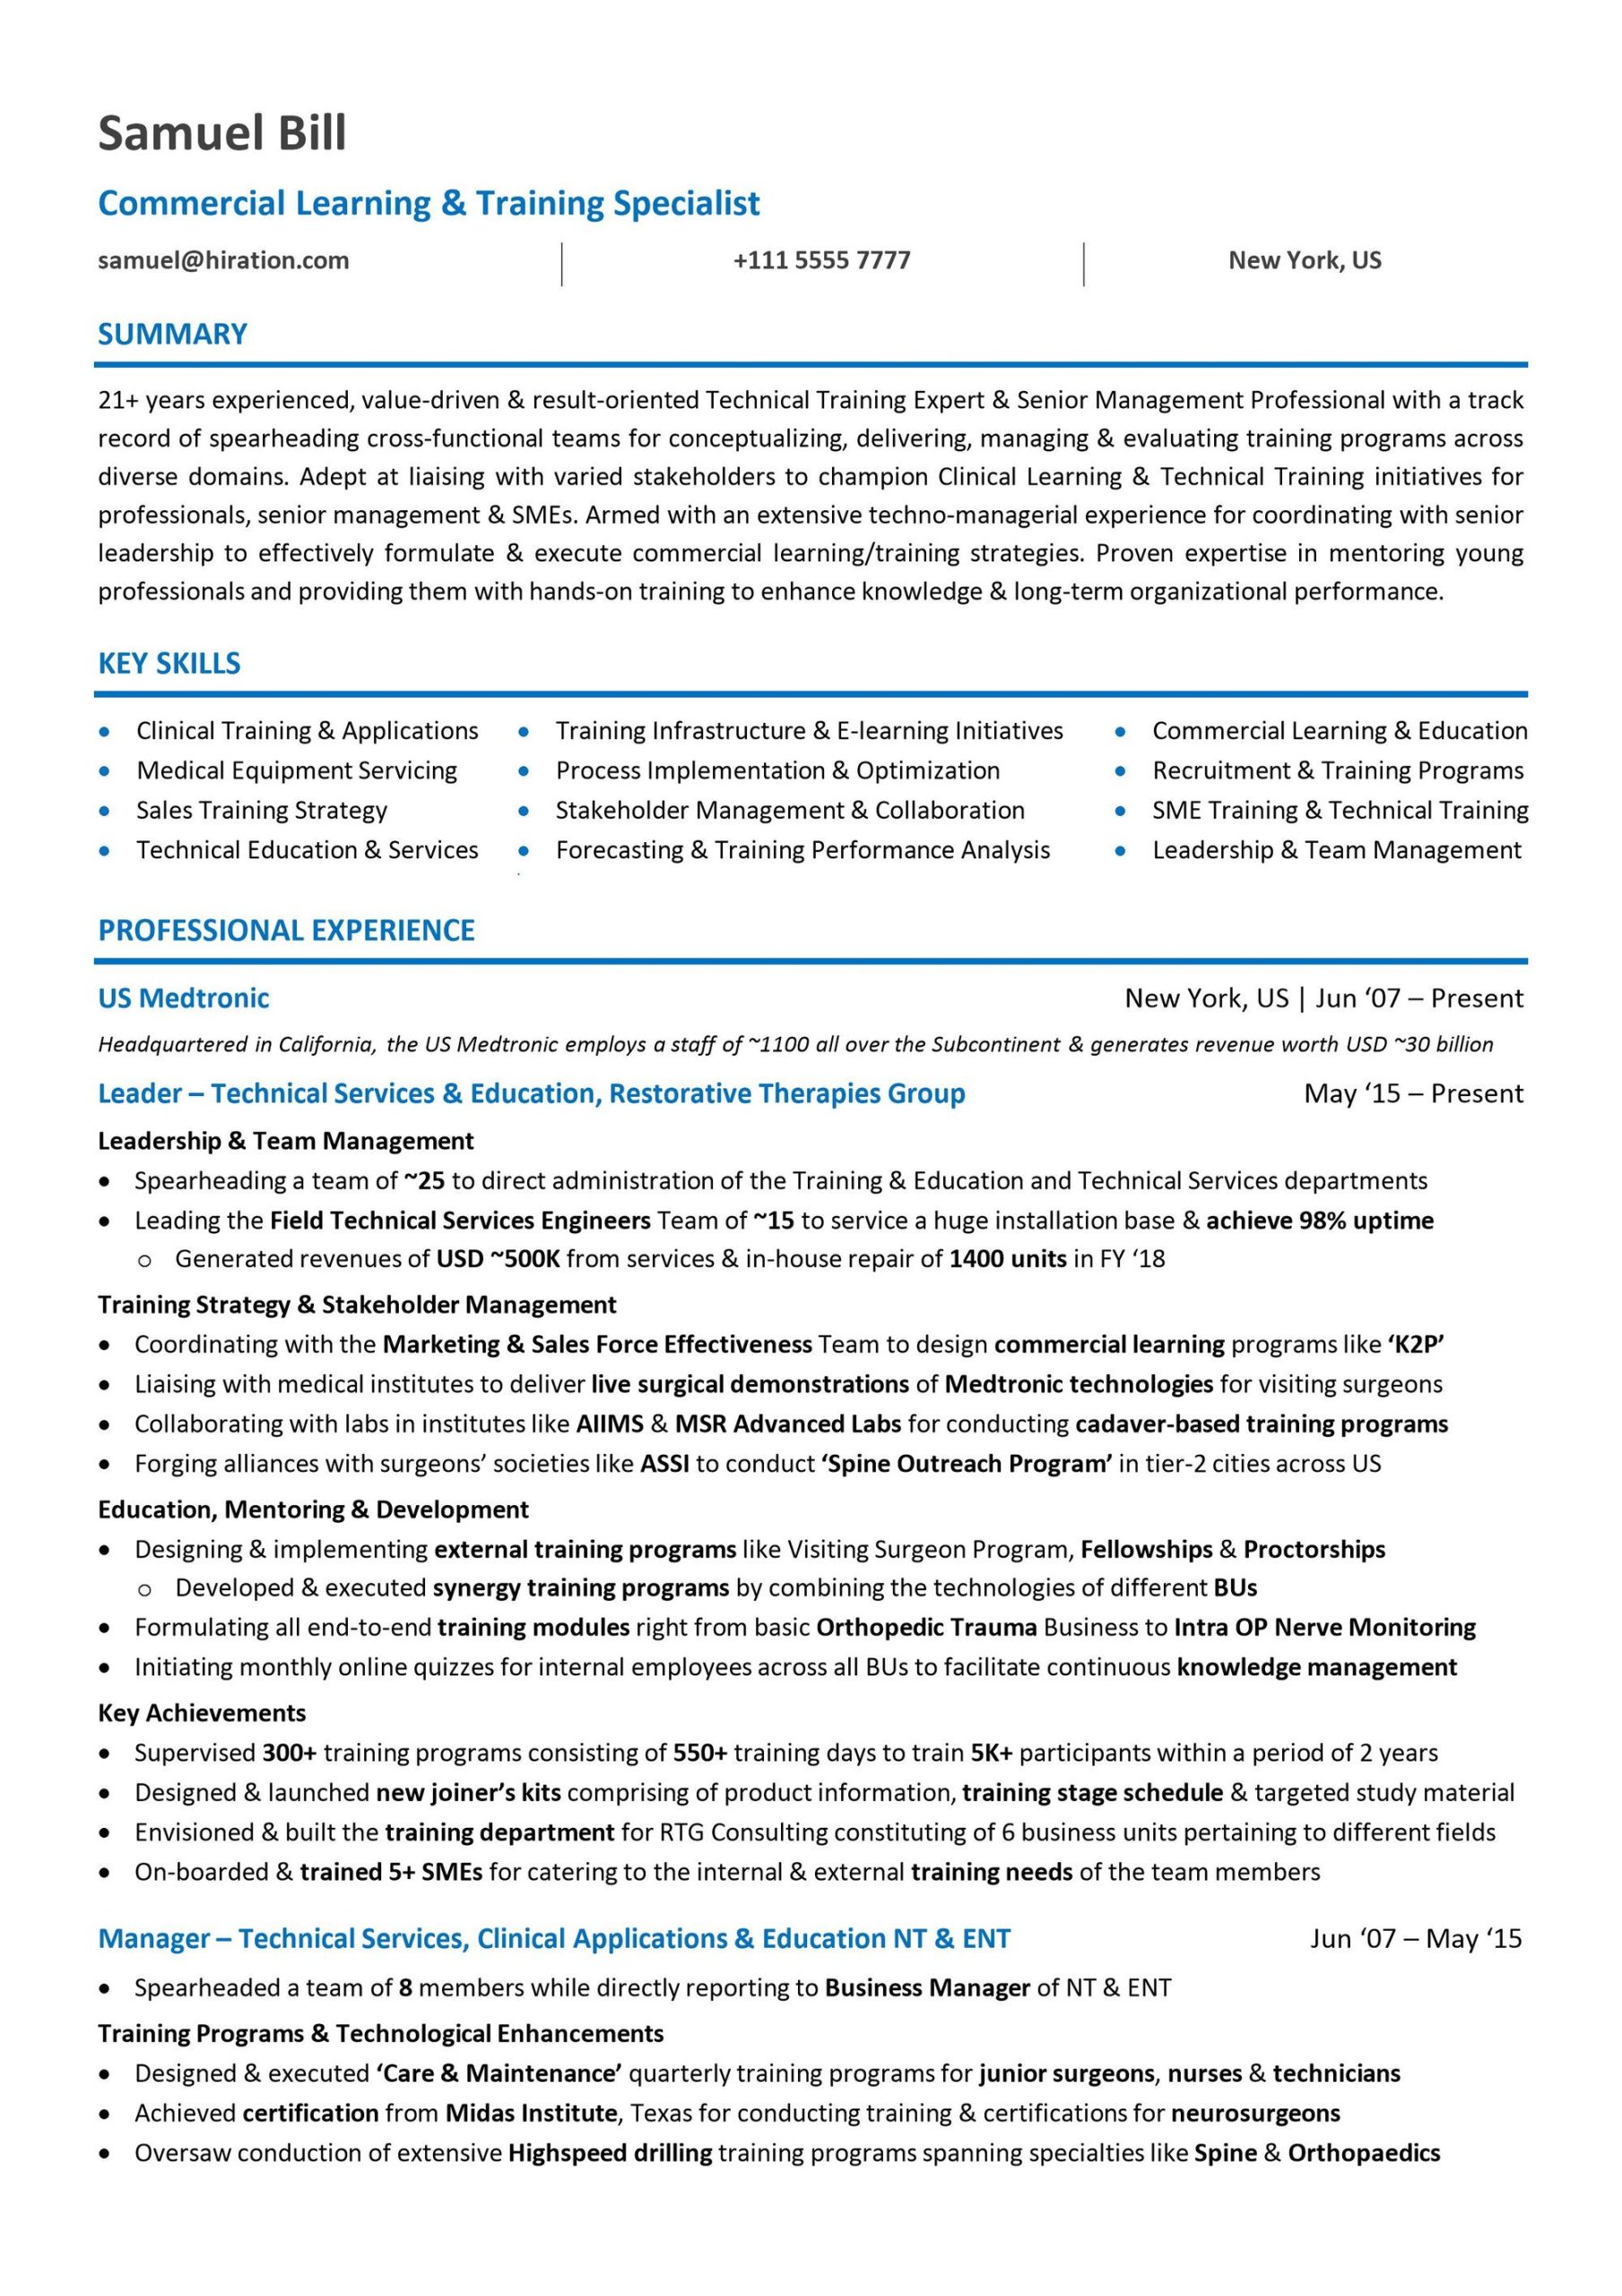 Transitioning Industries for Career Change Resume Objective Samples Career Change Resume: 2022 Guide to Resume for Career Change